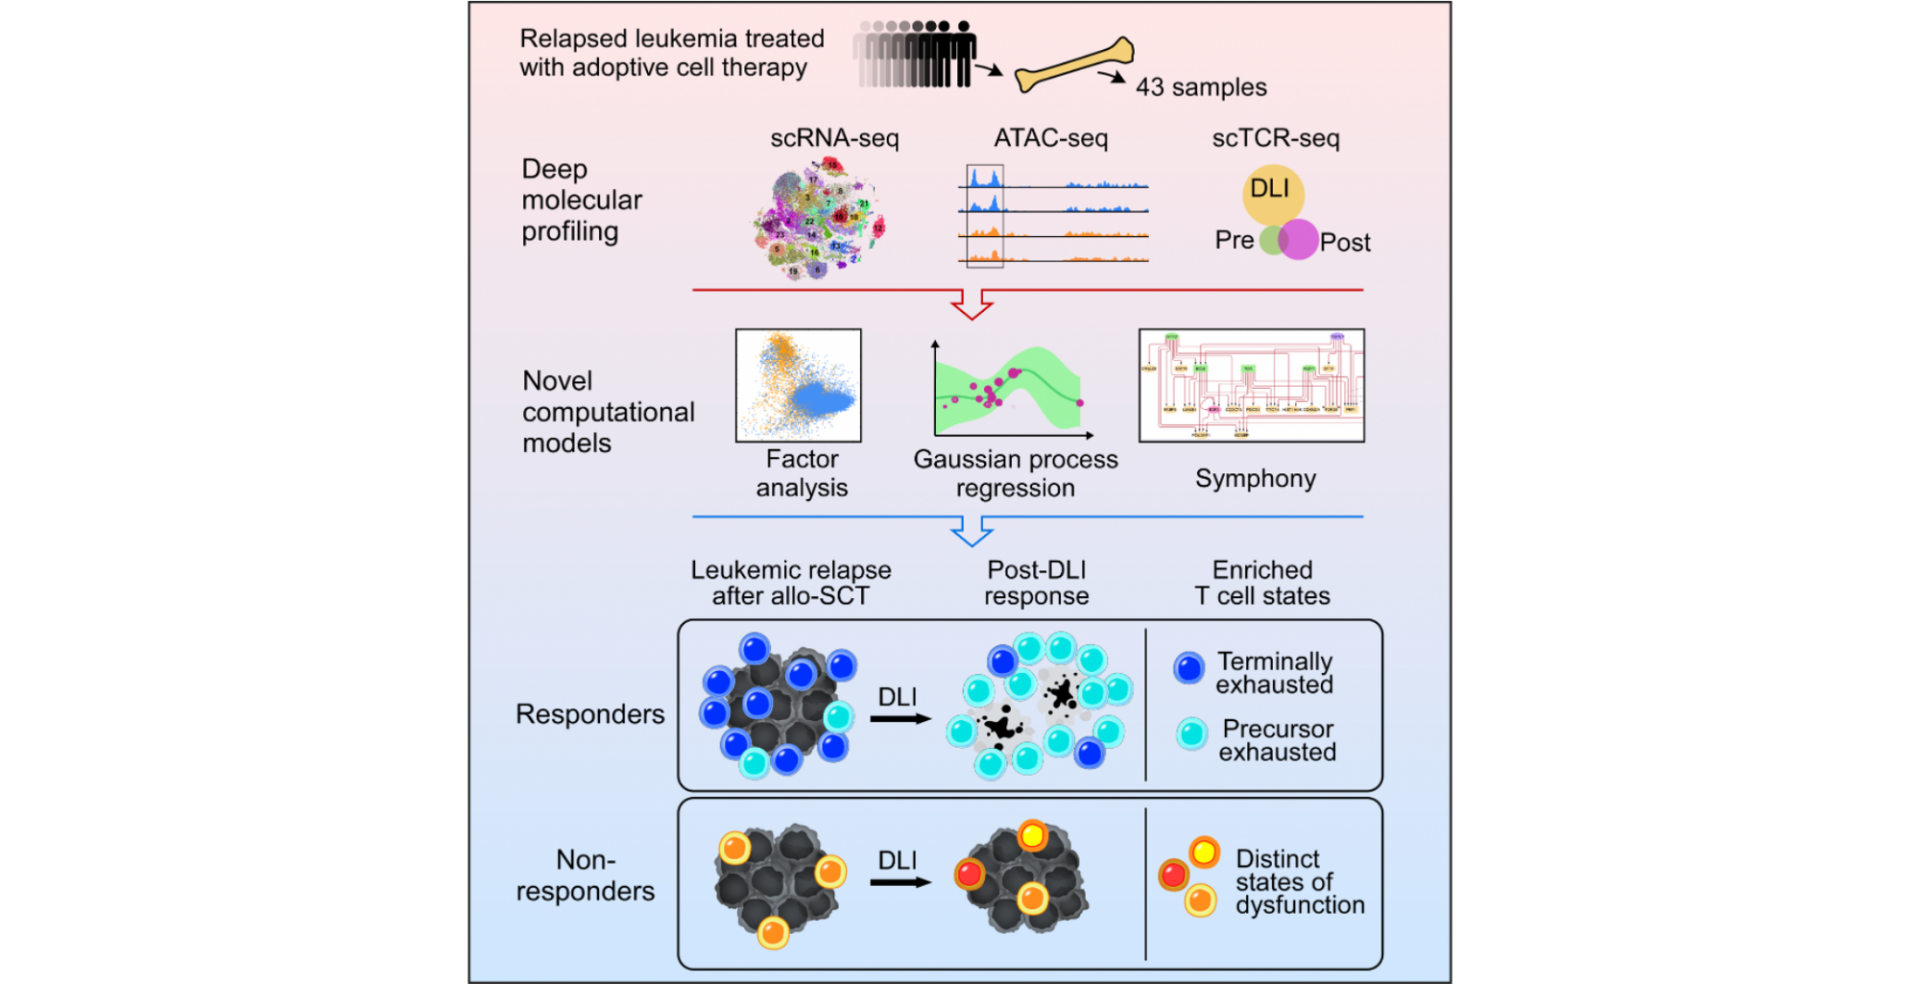 Mapping the Evolution of T Cell States During Response and Resistance to Adoptive Cellular Therapy